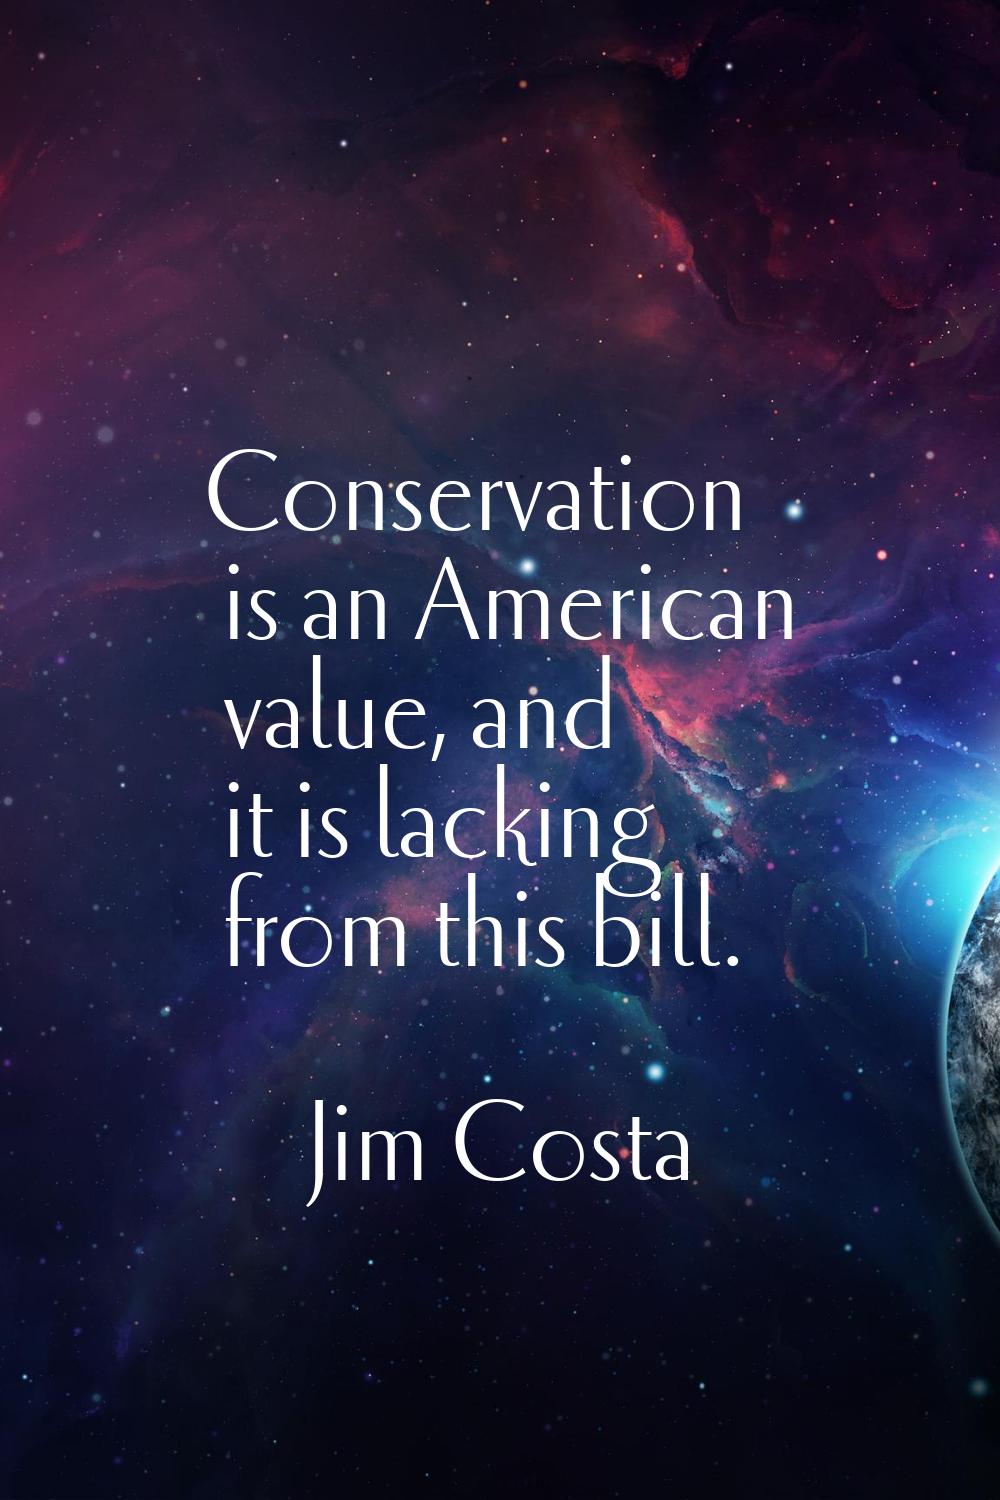 Conservation is an American value, and it is lacking from this bill.